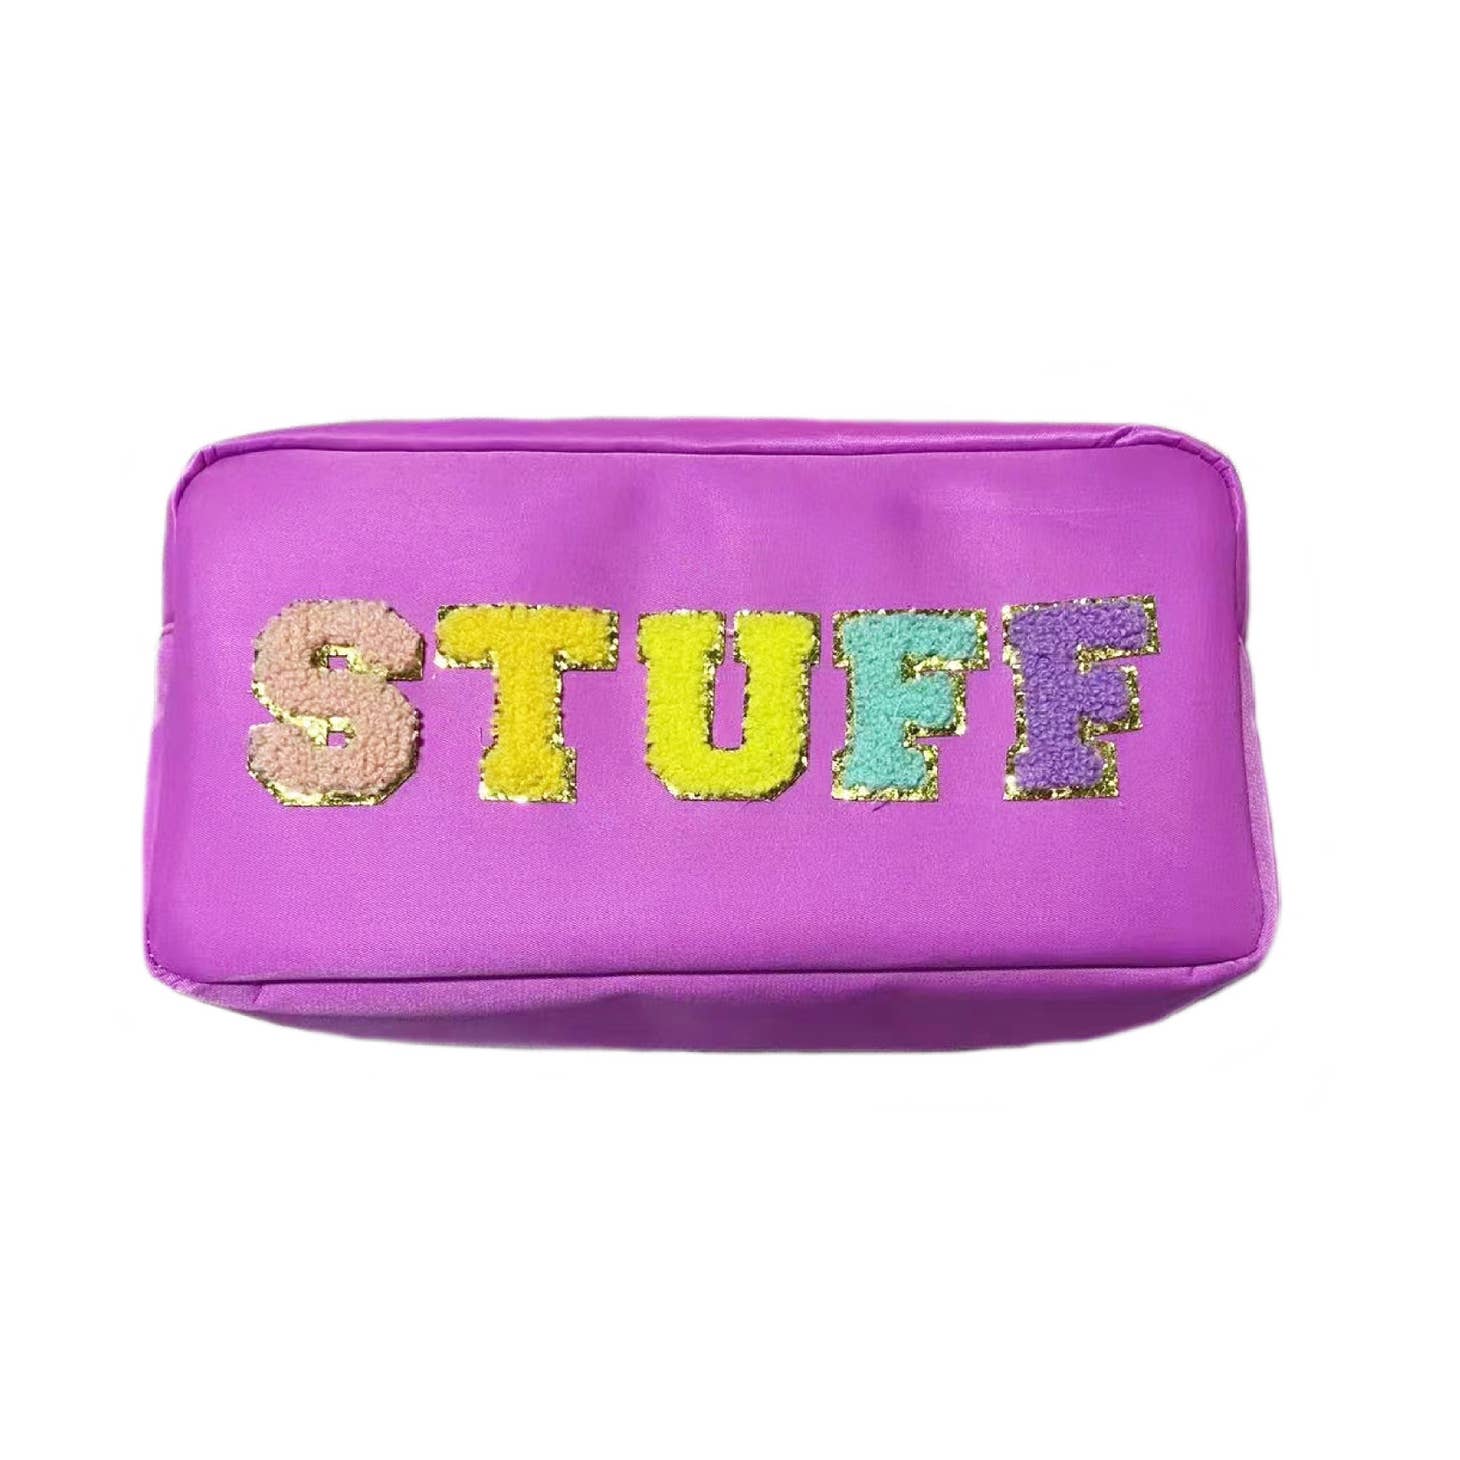 Purple Travel Bag With Trendy Patch Letters | Stuff